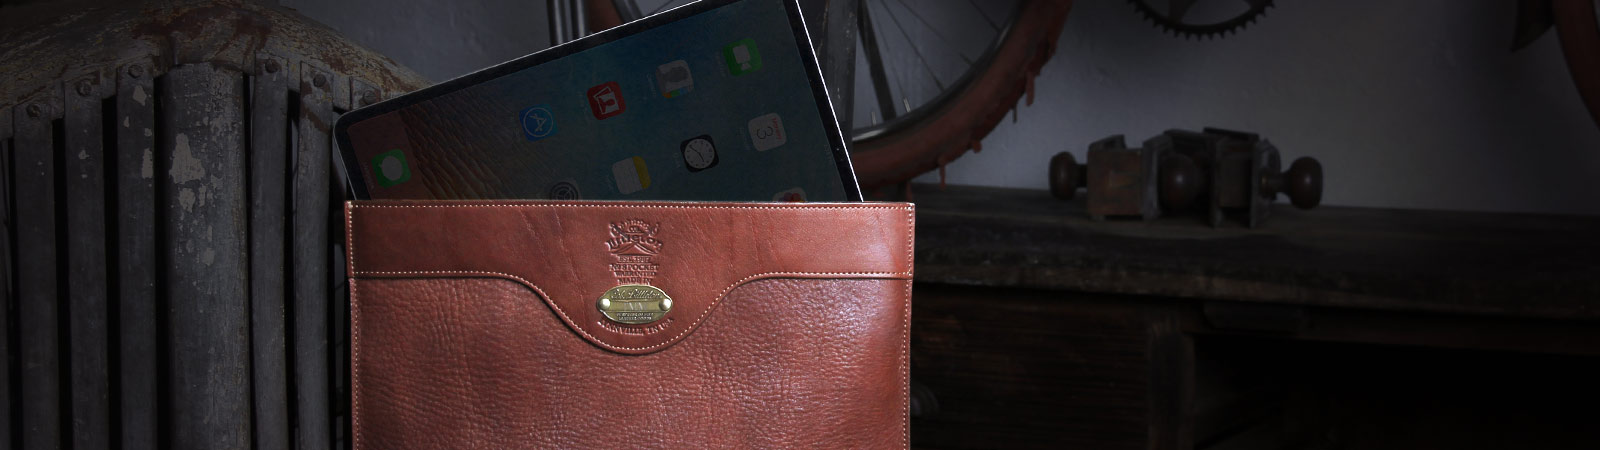 Tablet Cases Category Header - No. 8 Tablet Pocket with iPad coming out of the top